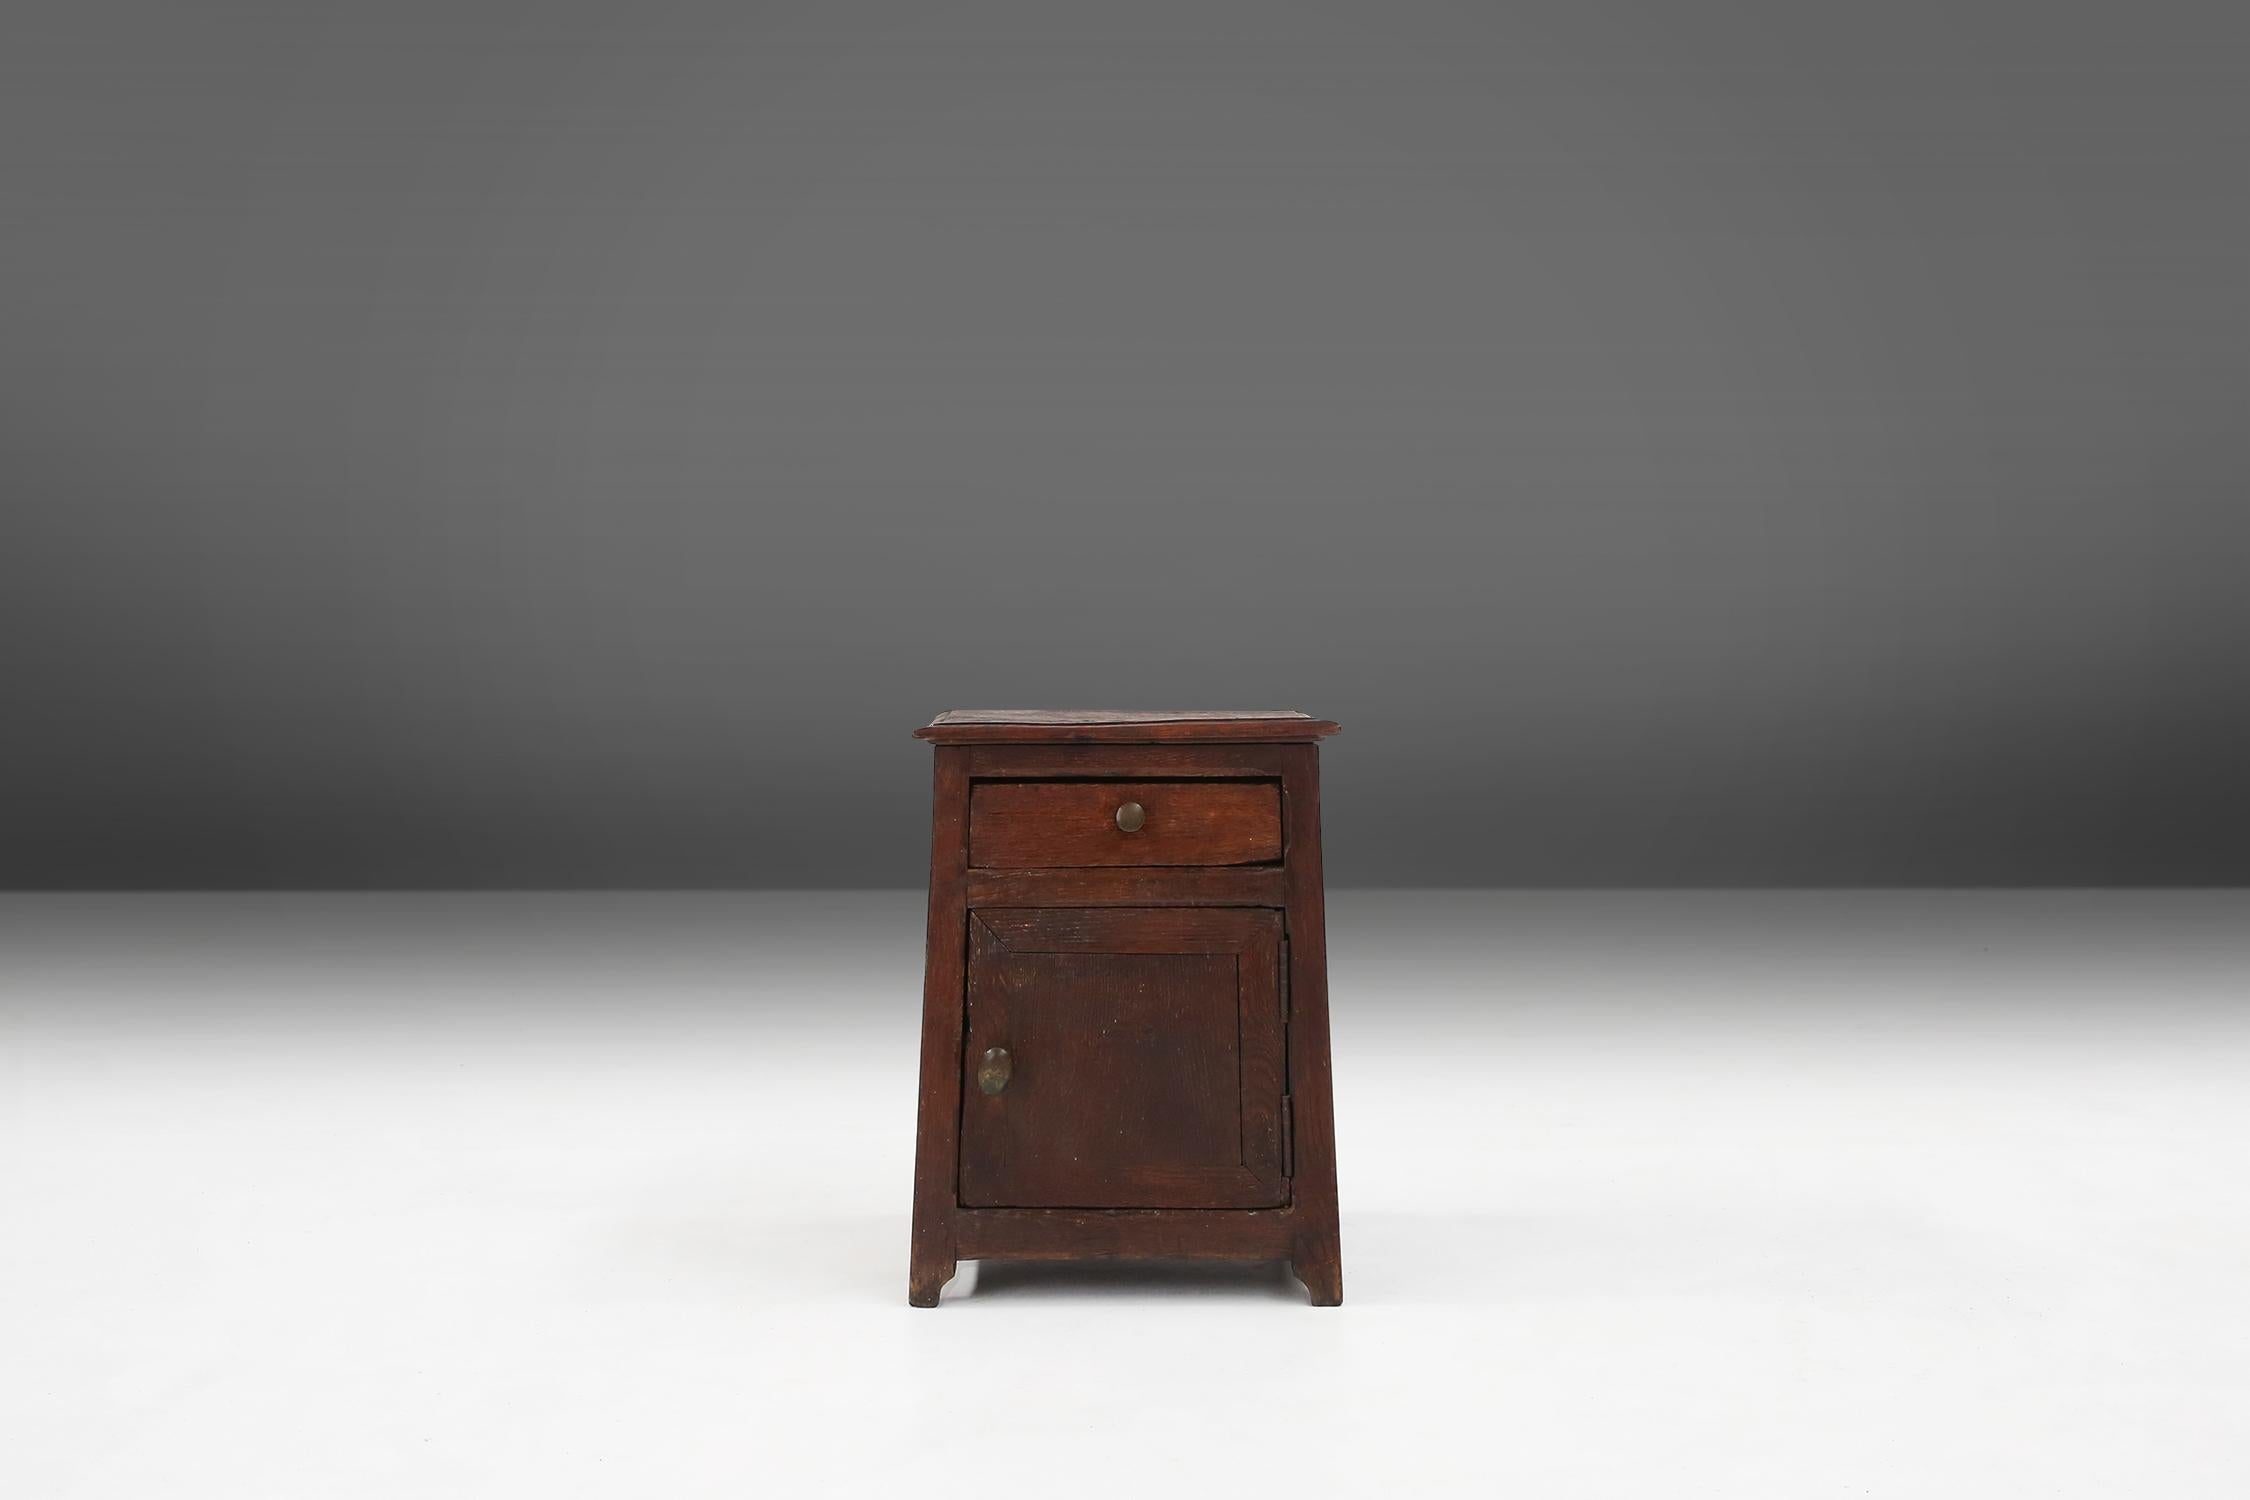 A rustic cabinet it features wit a small door and a single drawer. The cabinet is made of solid wood and has some nice details on the side. The drawer and door have a metal handle.

This cabinet can also be used as a stool.